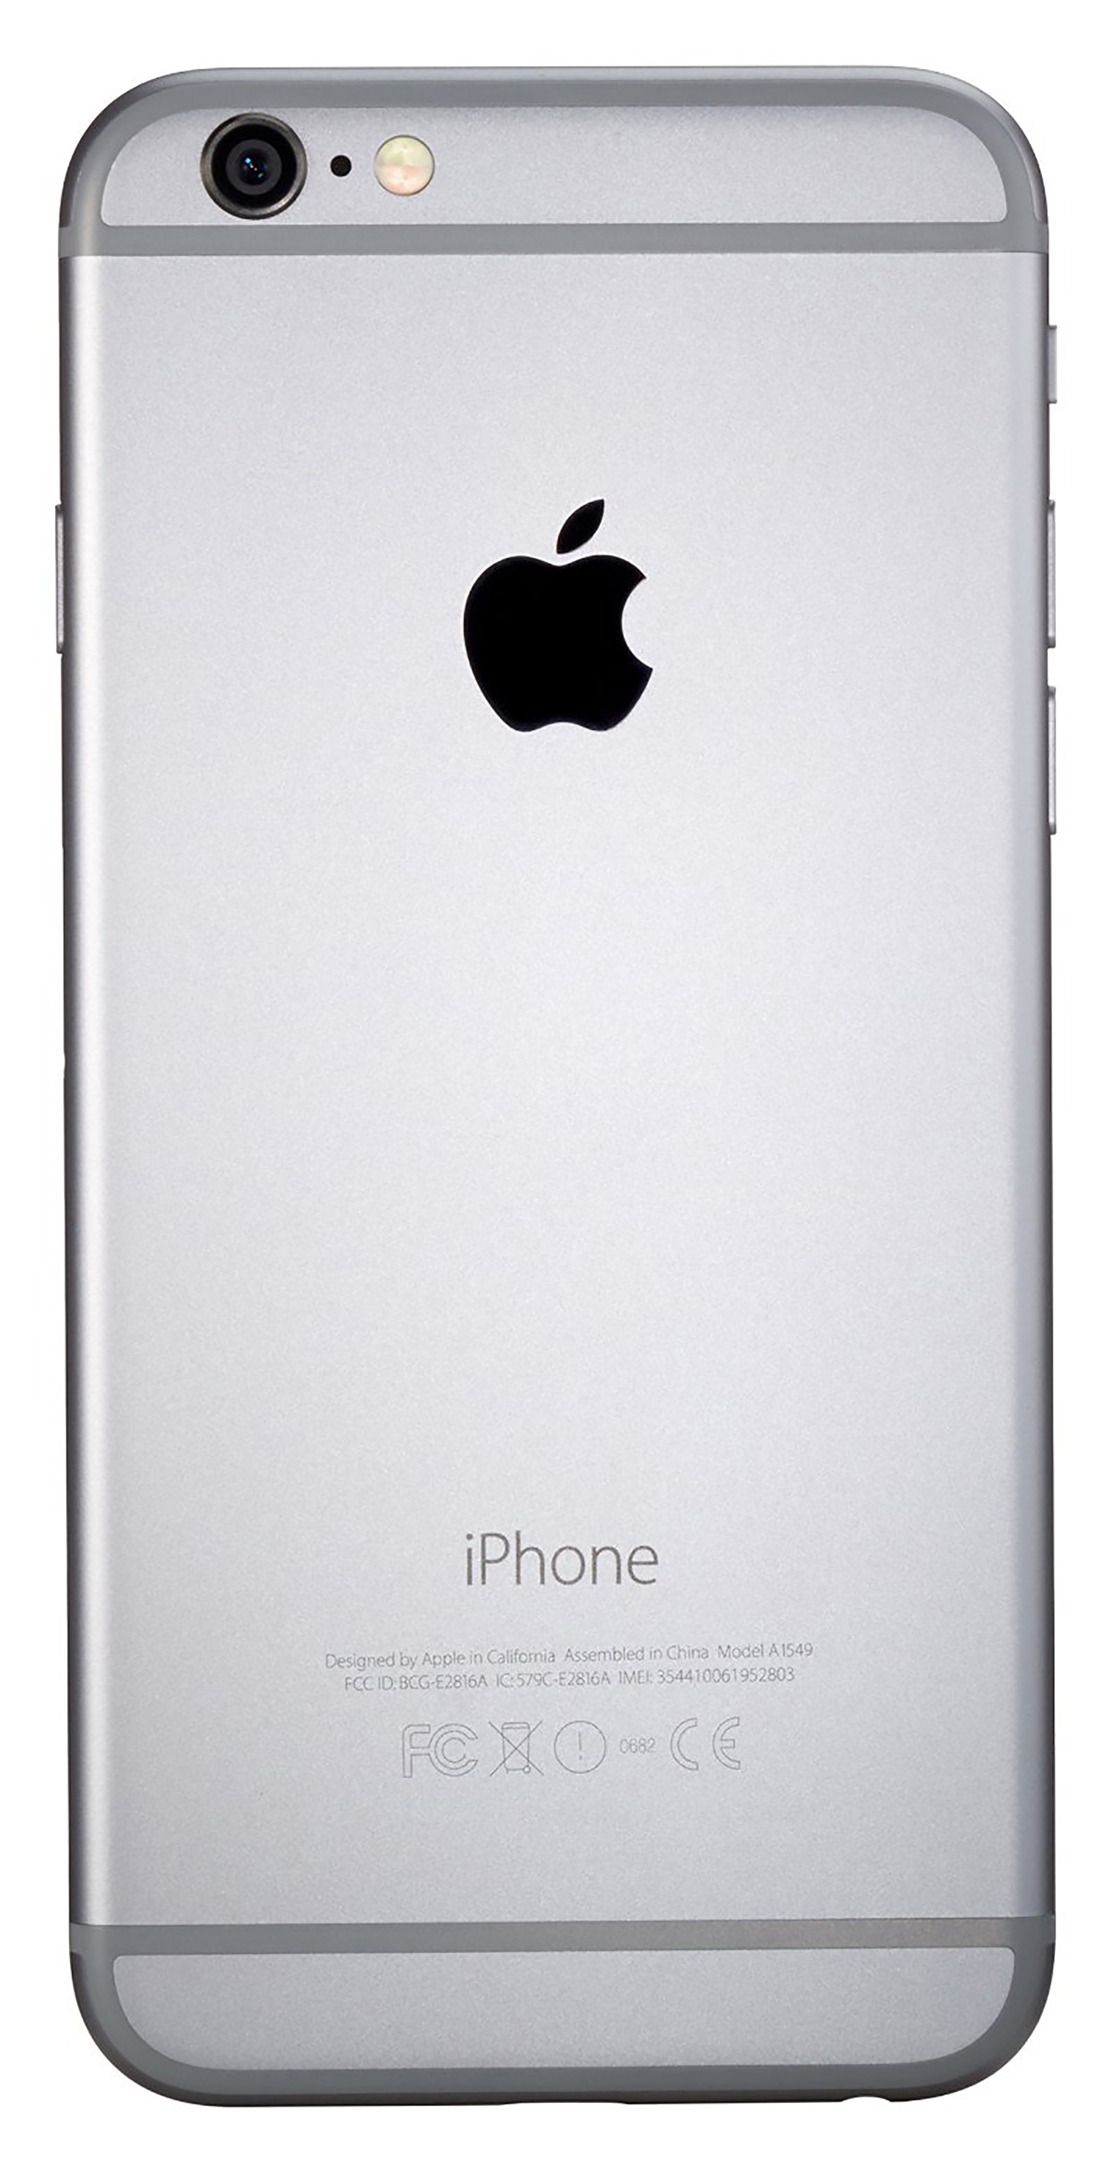 Restored Apple iPhone 6 Plus 16GB Space Gray LTE Cellular AT&T MGAL2LL/A (Refurbished) - image 3 of 3